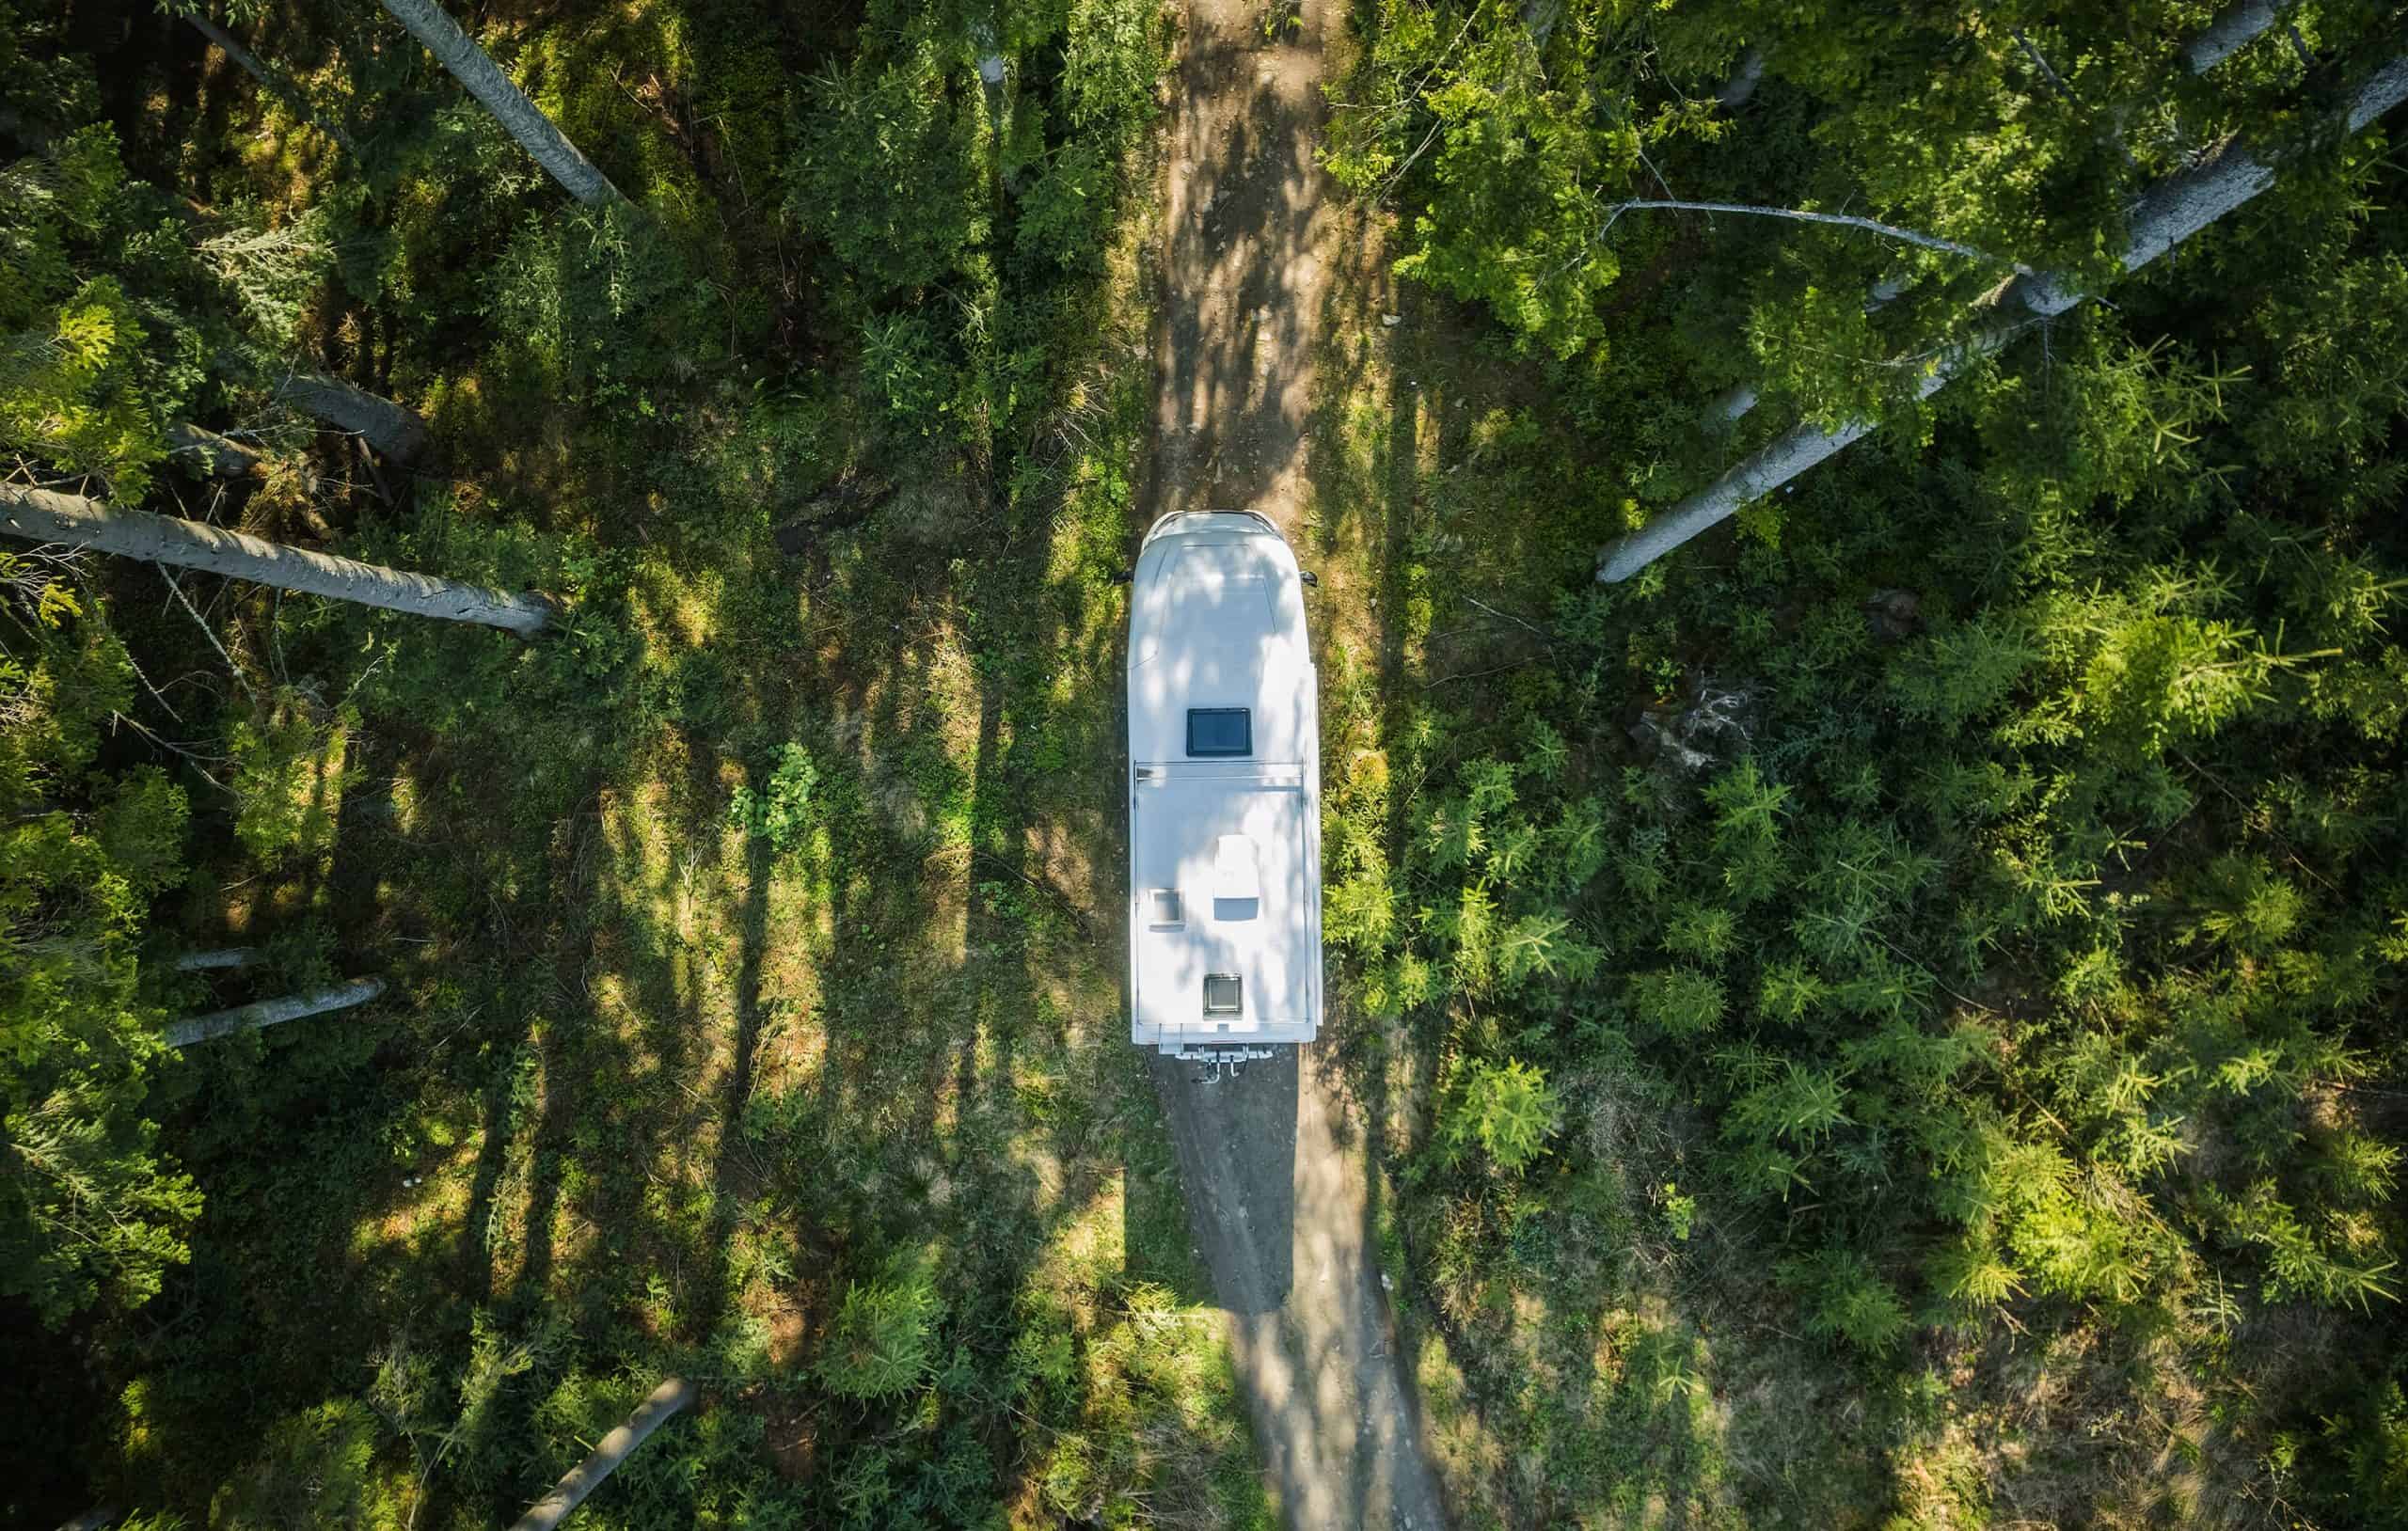 Topdown view of motorhome in forest